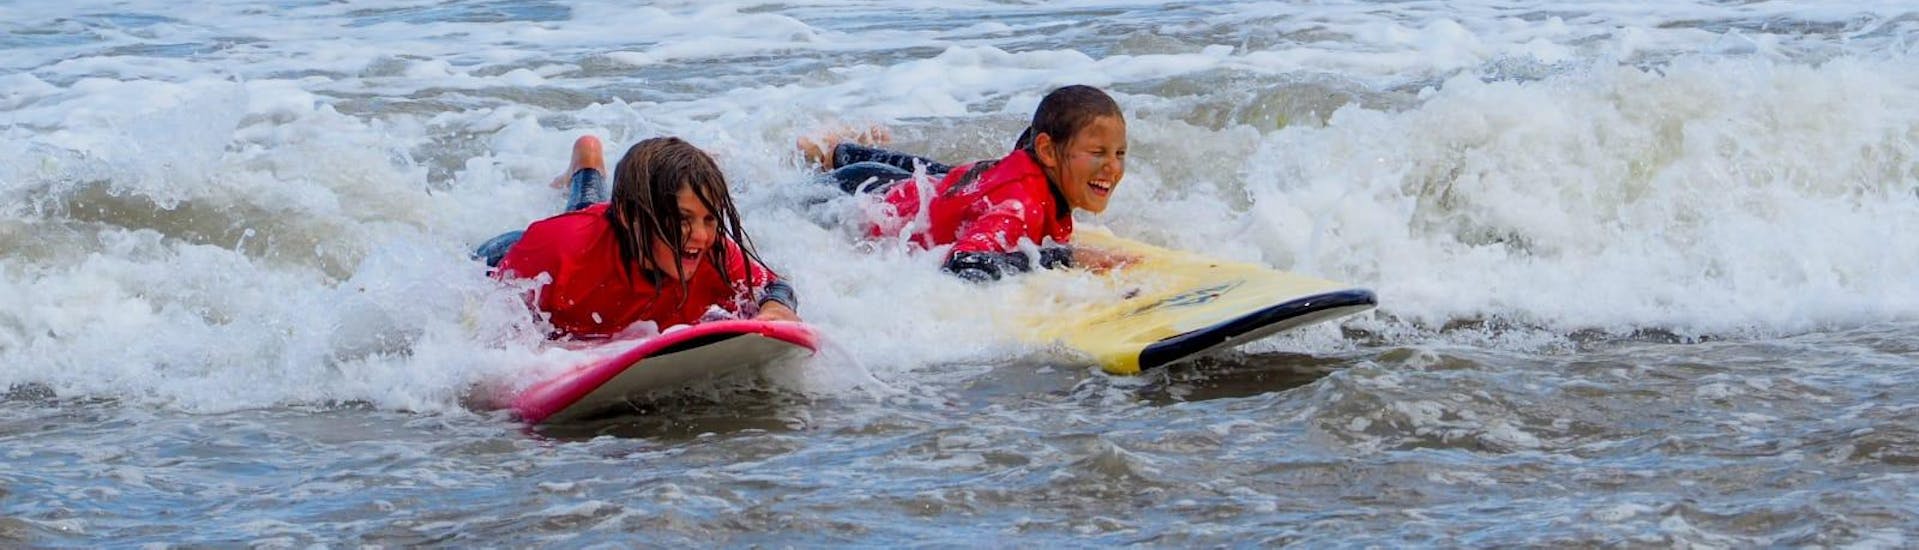 Two kids visibly have fun in the water during their Private Surfing Lessons at Playa de Sabón for all Levels, organized by Prado Surf.